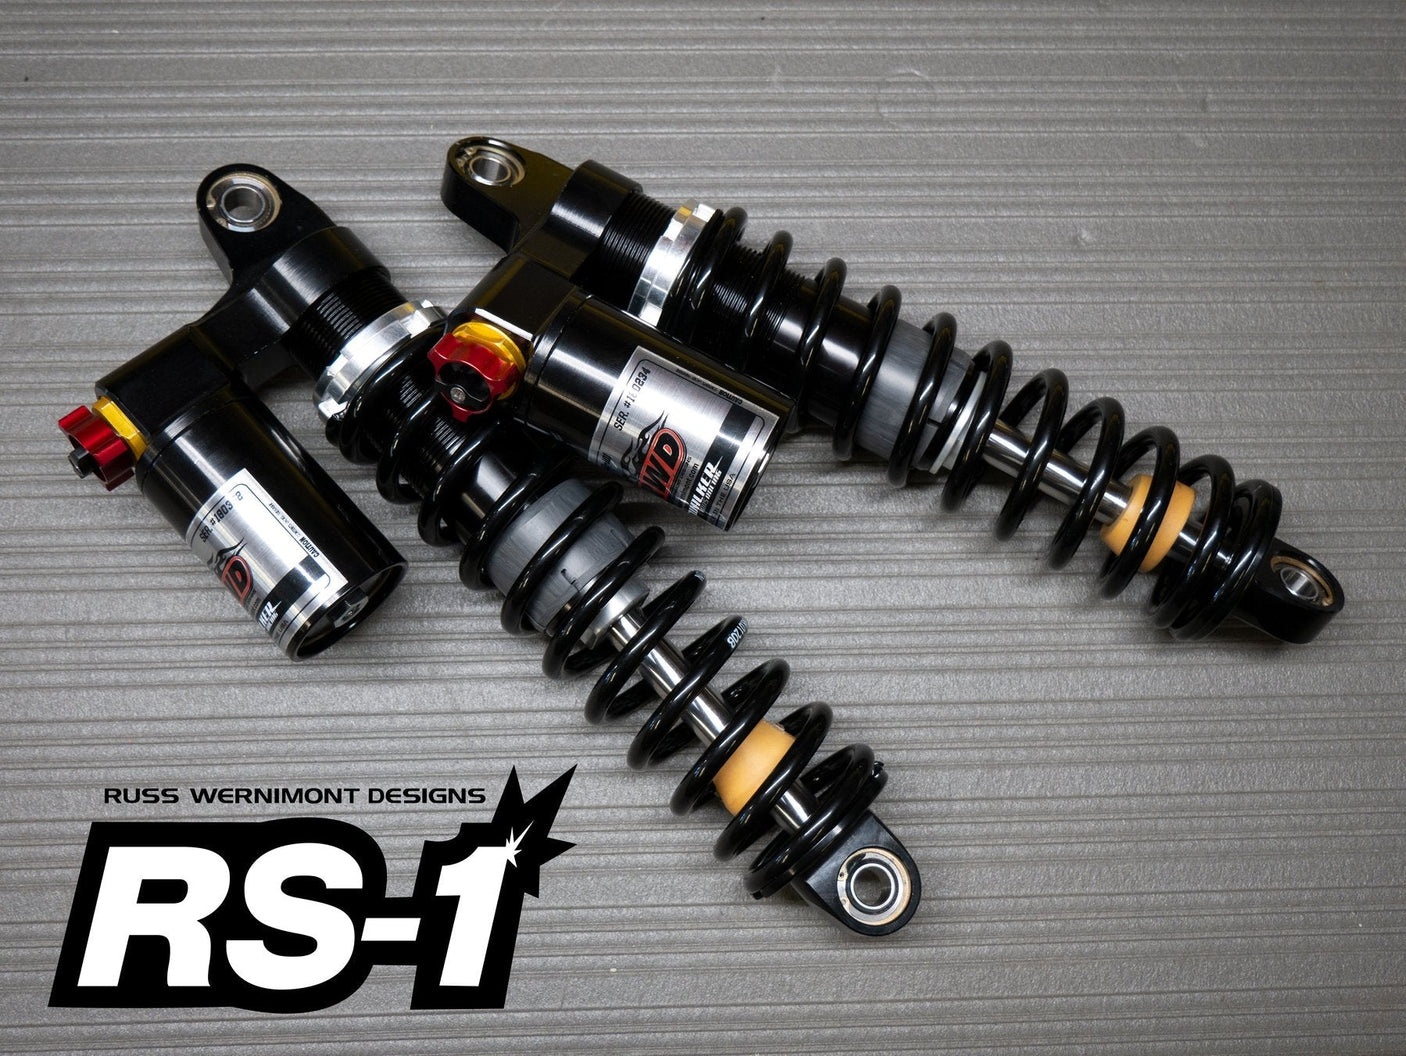 RS-1 SHOCK ABSORBER FOR TOURING - Blood Eagle Speed Shop